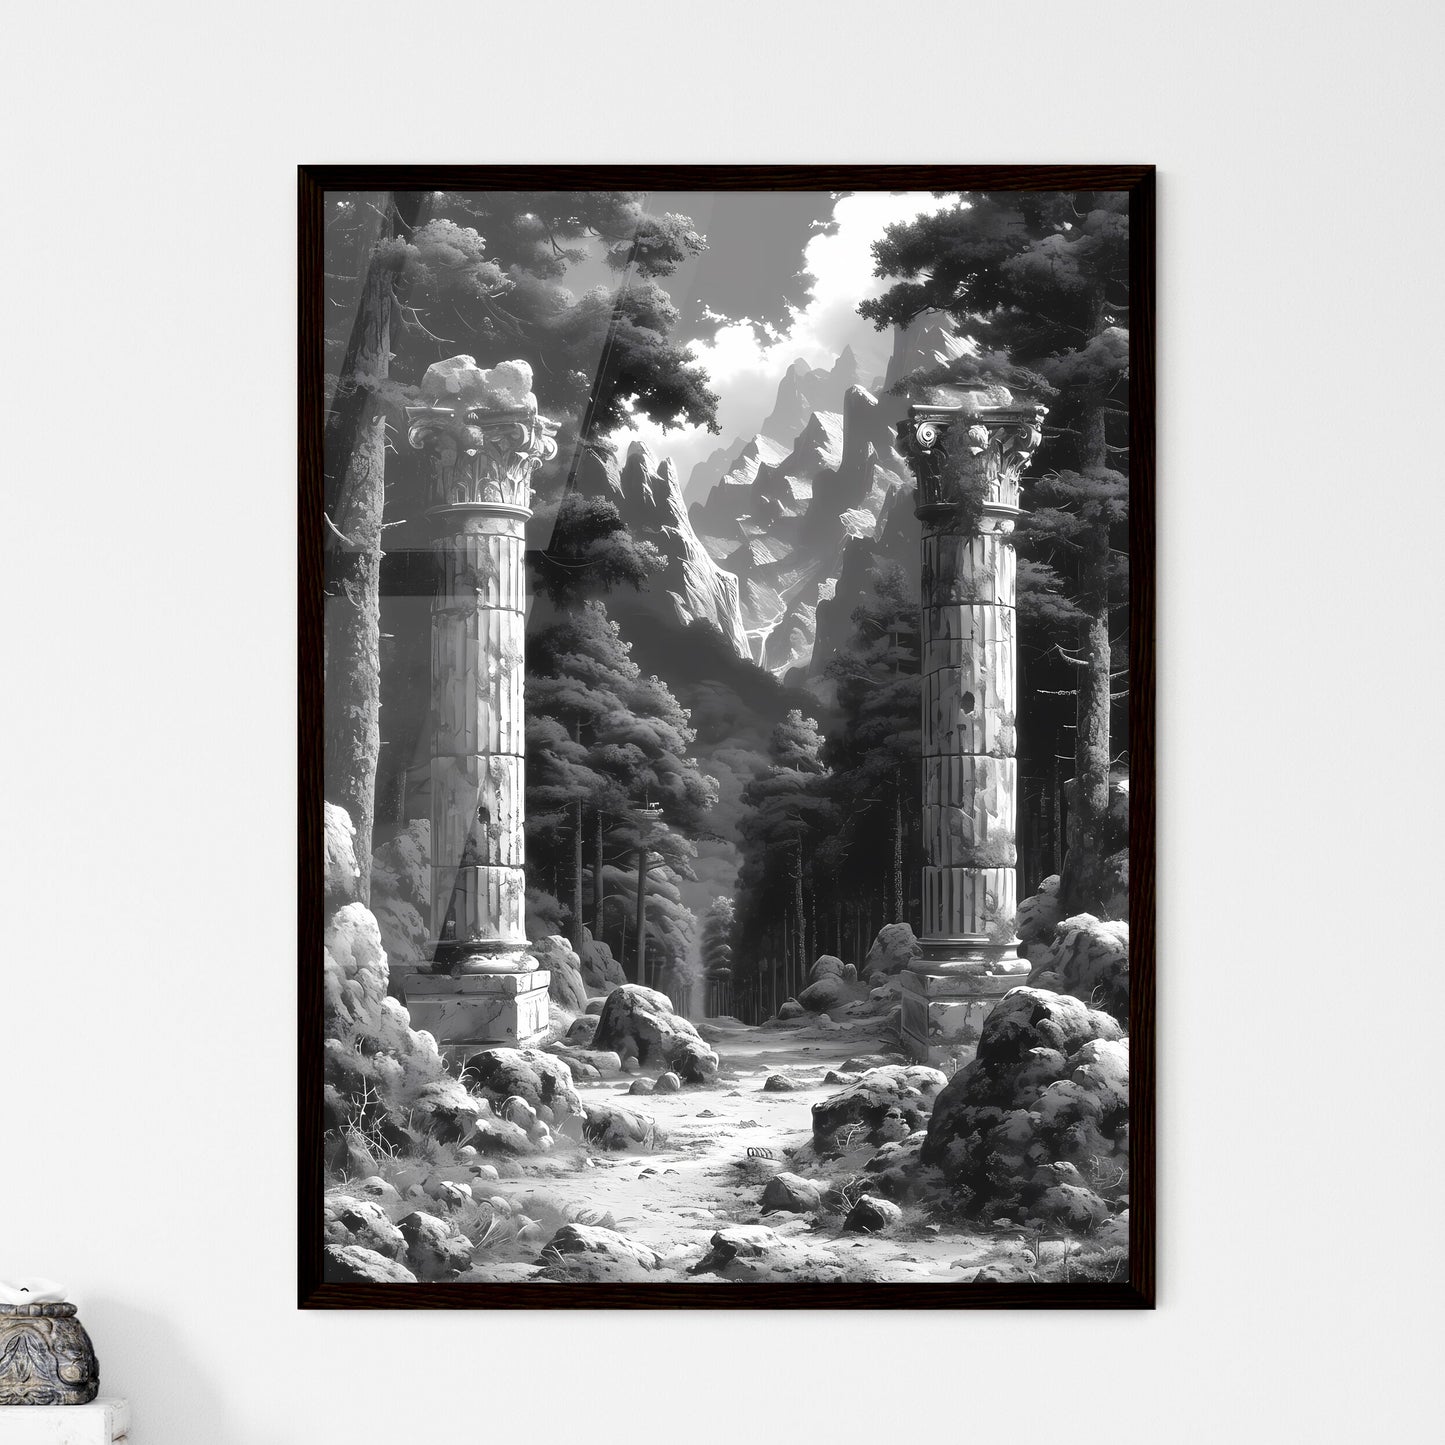 A French Chateau winery - Art print of a stone pillars in a forest Default Title